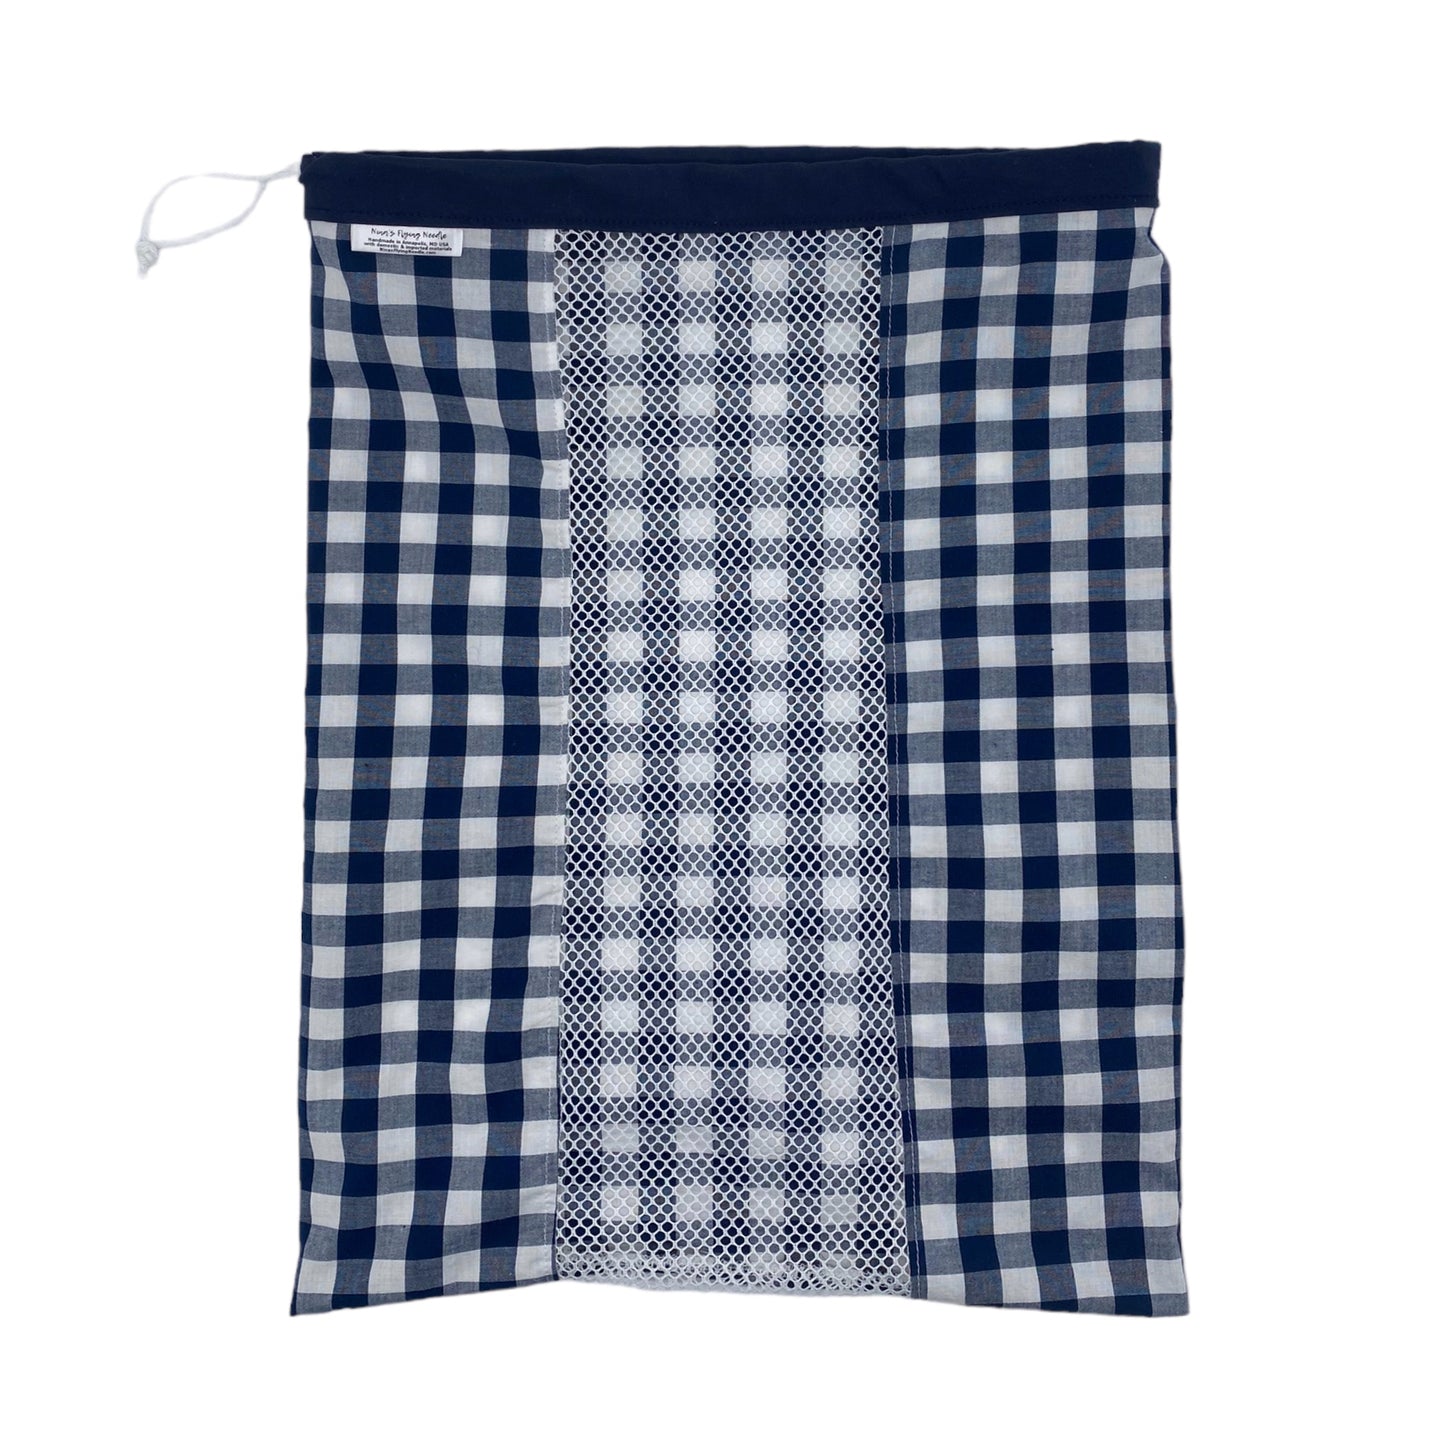 Large Produce Bag Gingham Navy and White